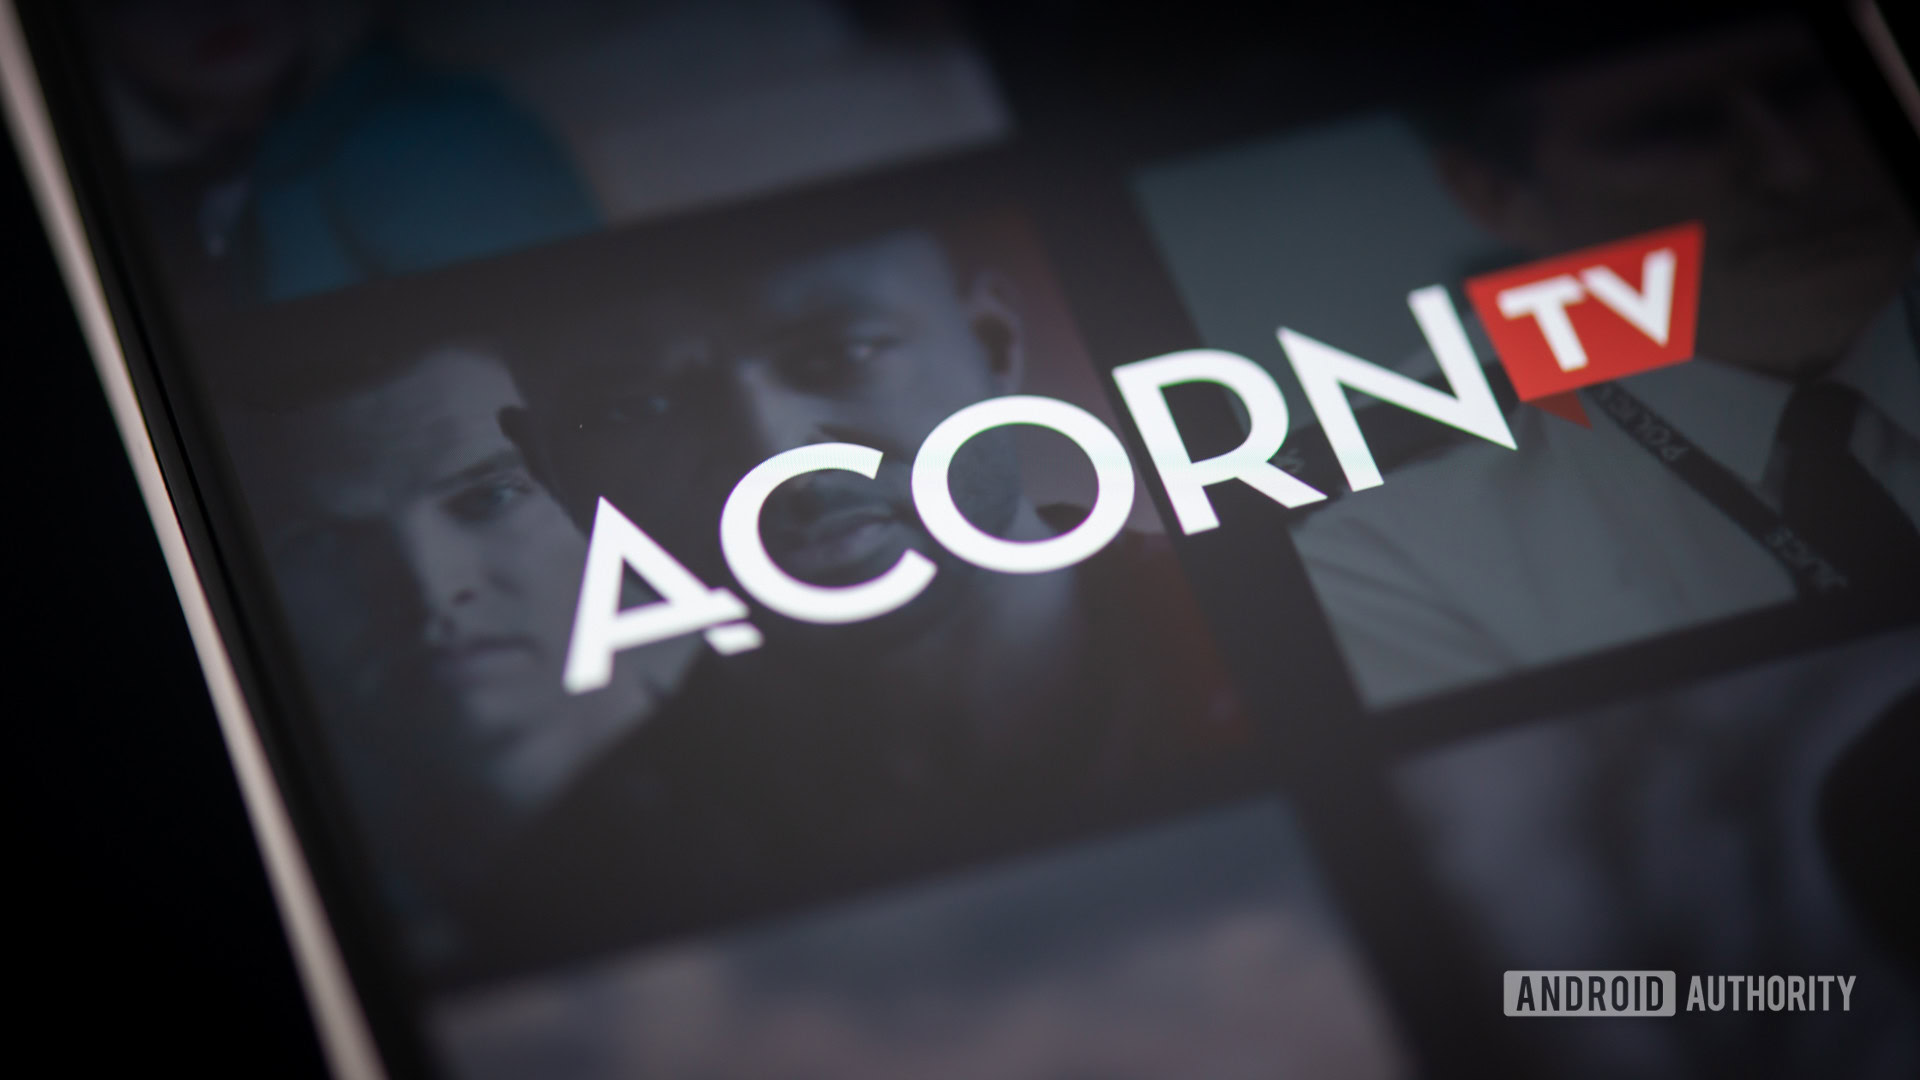 Acorn TV Price, platforms, and everything else you need to know